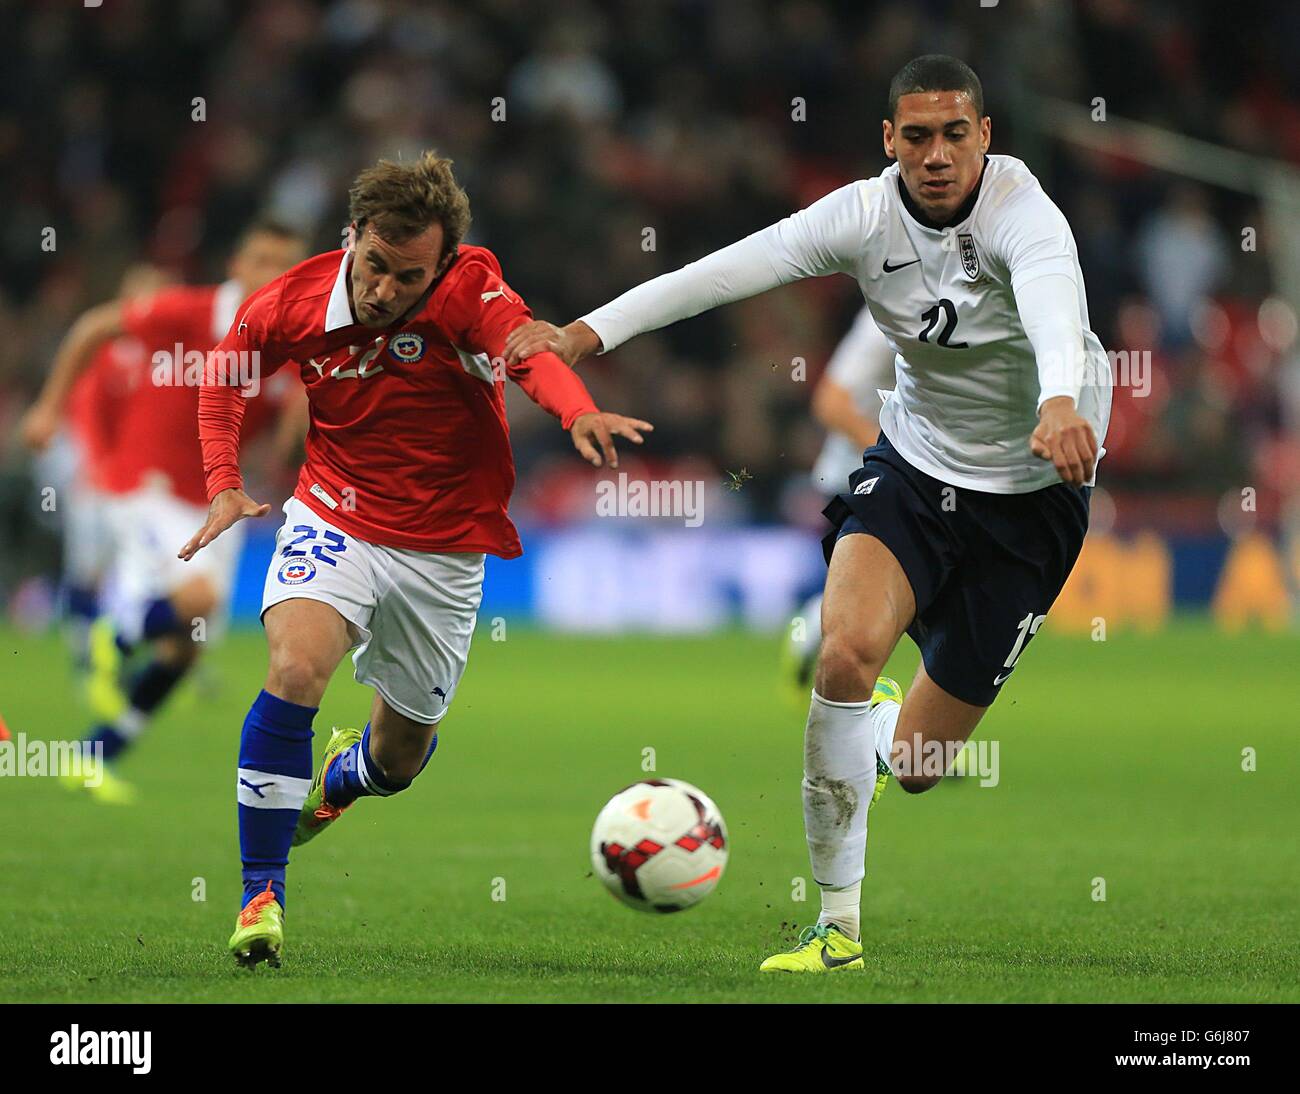 England's Chris Smalling (right) and Chile's Jose Pedro Fuenzalida battle for the ball Stock Photo